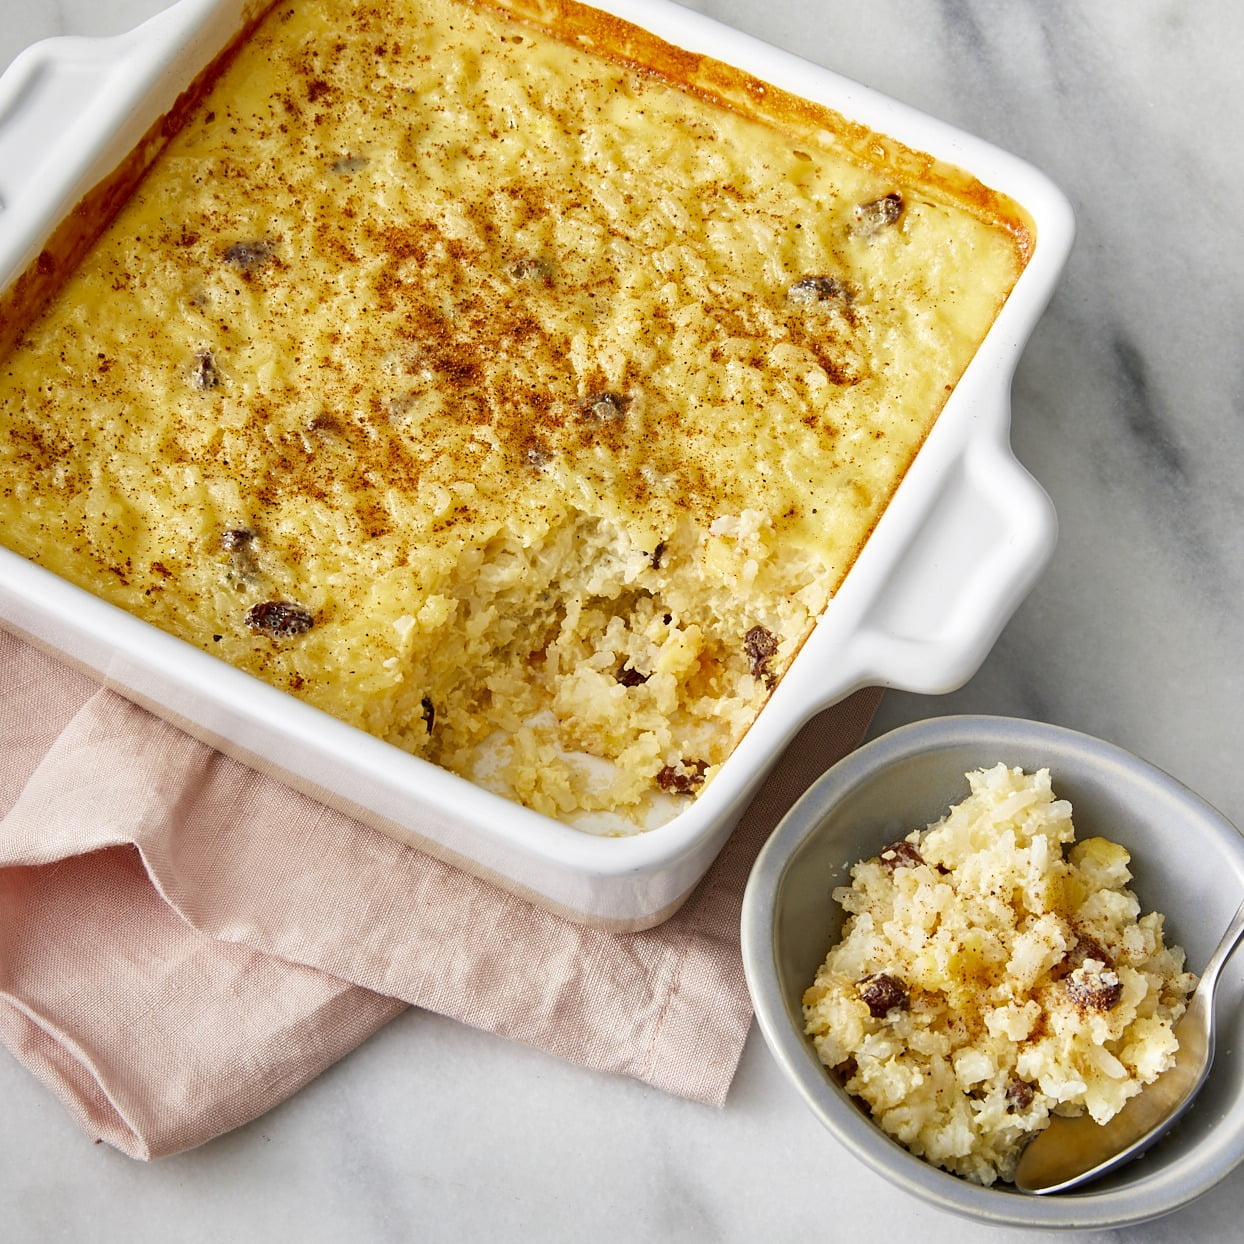 BAKED RICE PUDDING - BORN 3 EGGS